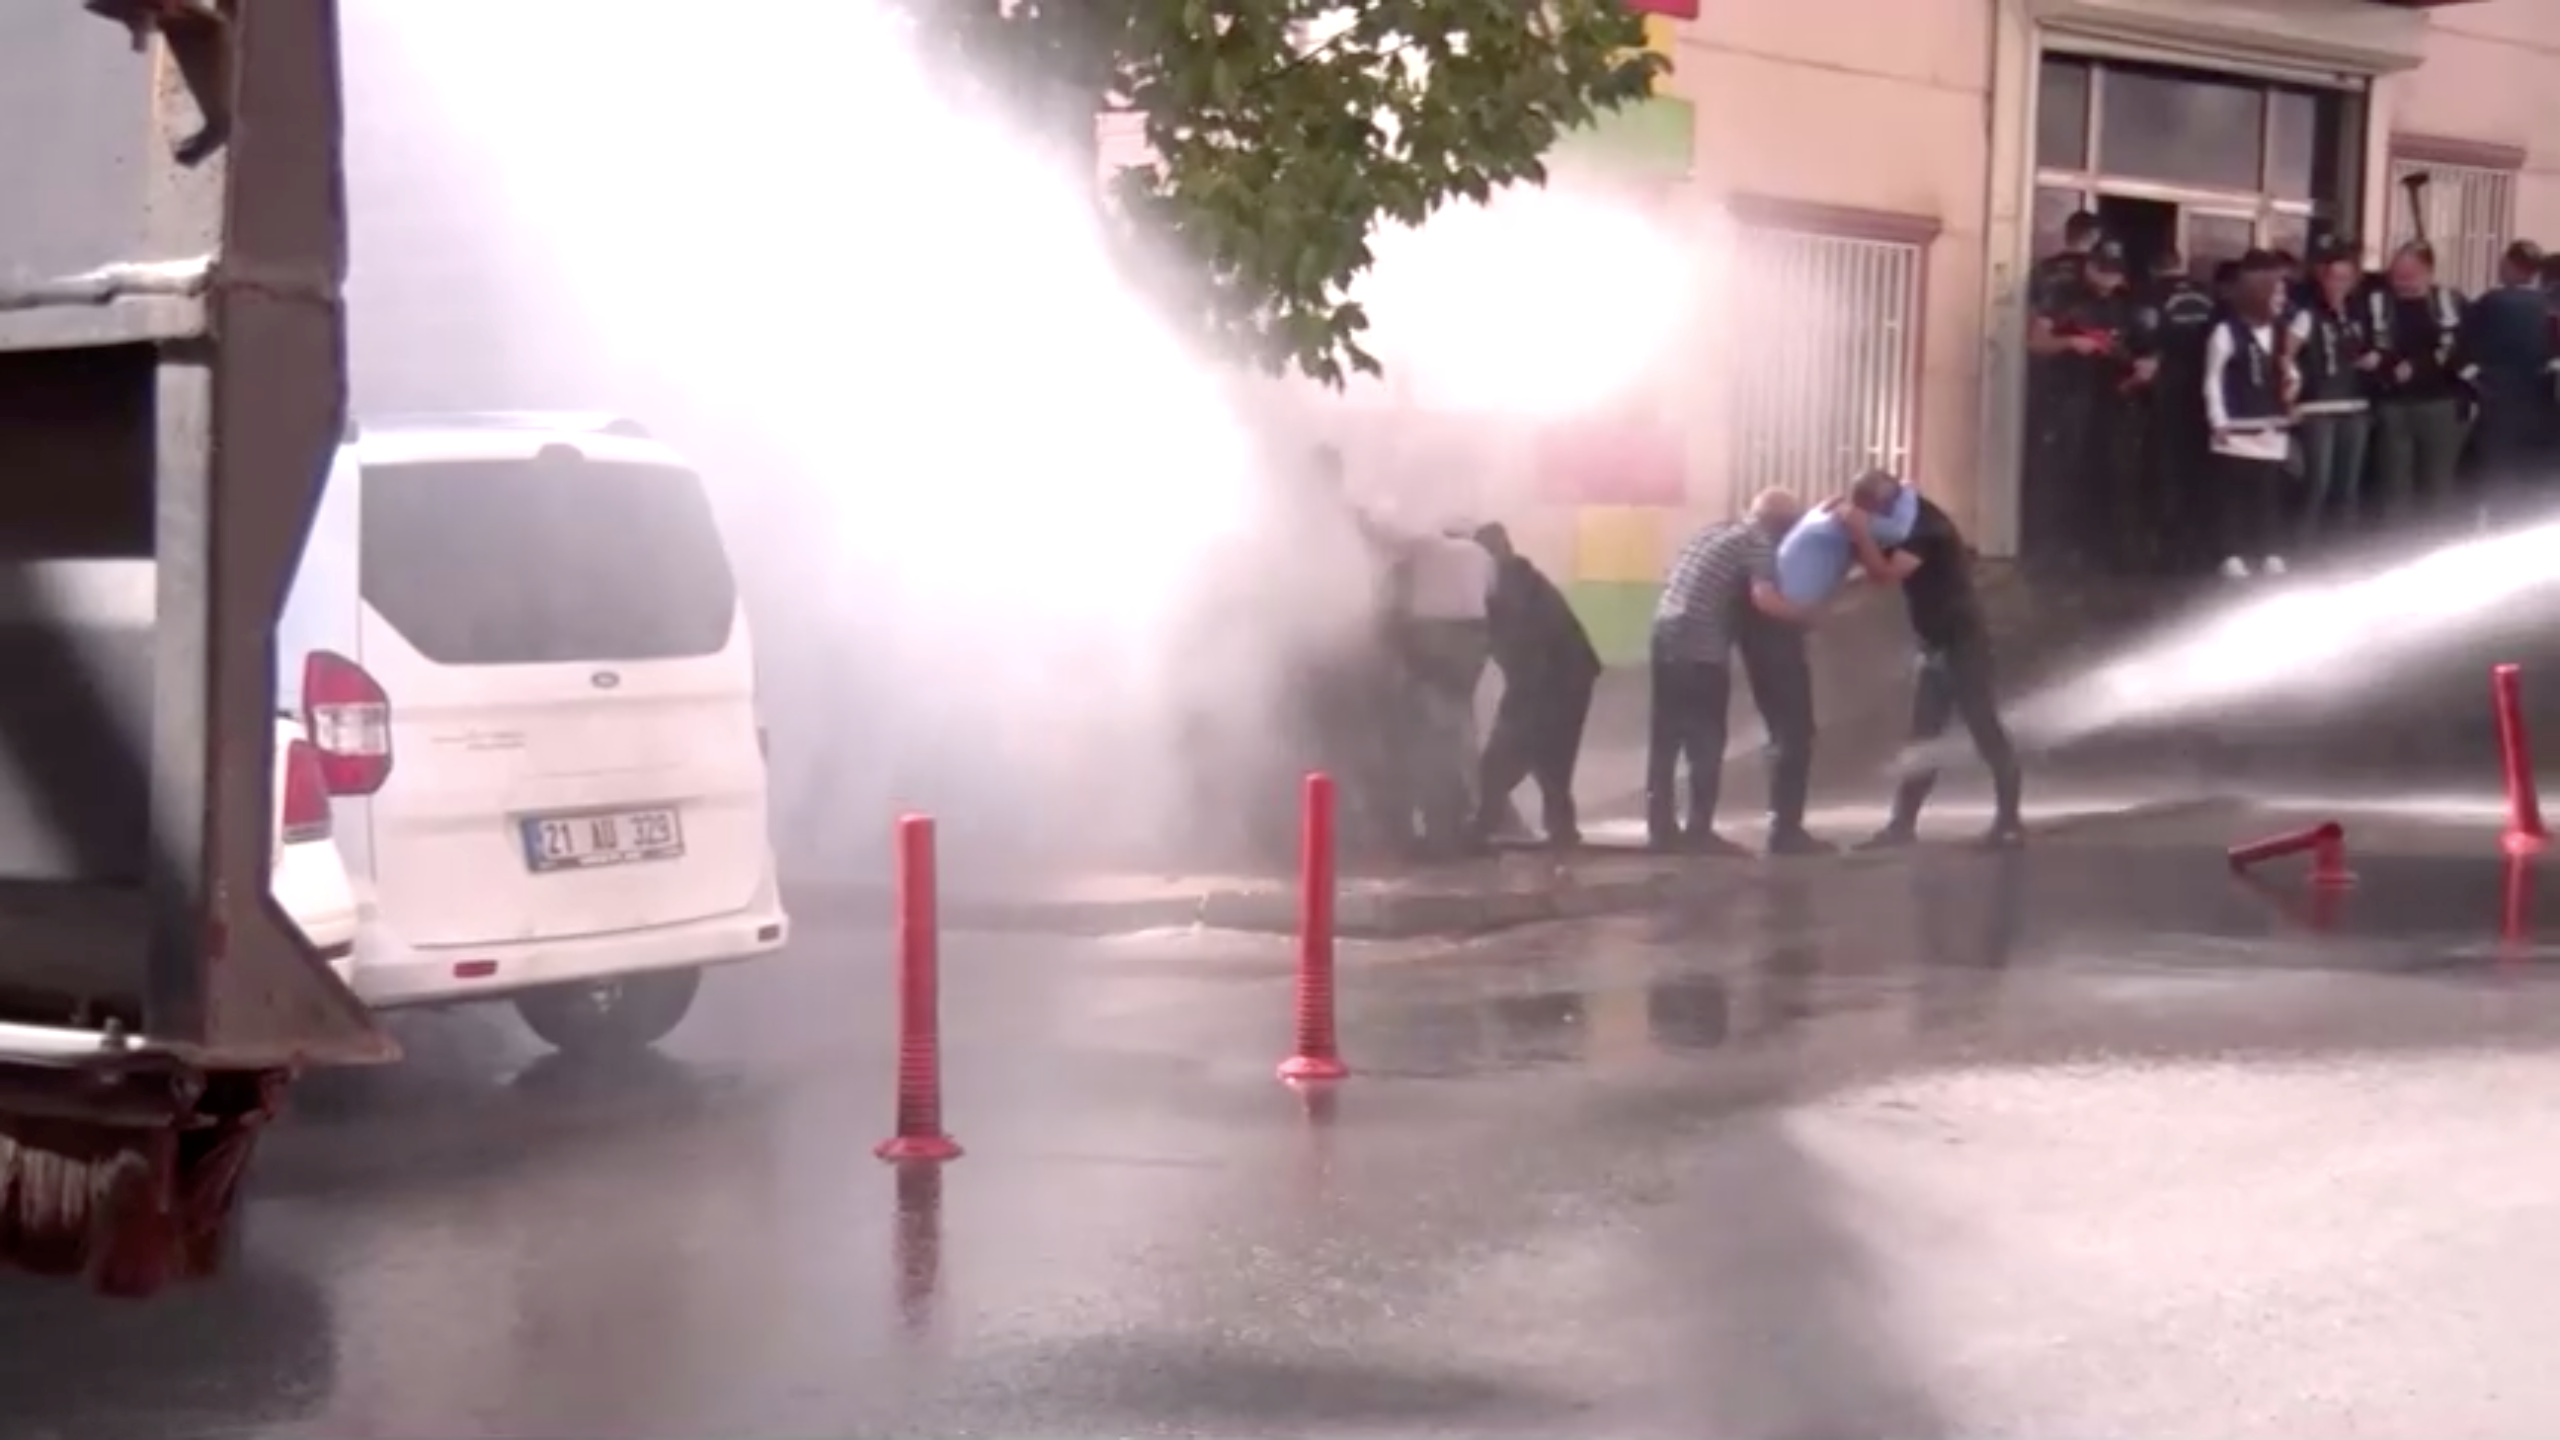 Kurds protesting Turkey's Syria operation are hit by water sprayed from a water cannon in Diyarbakir